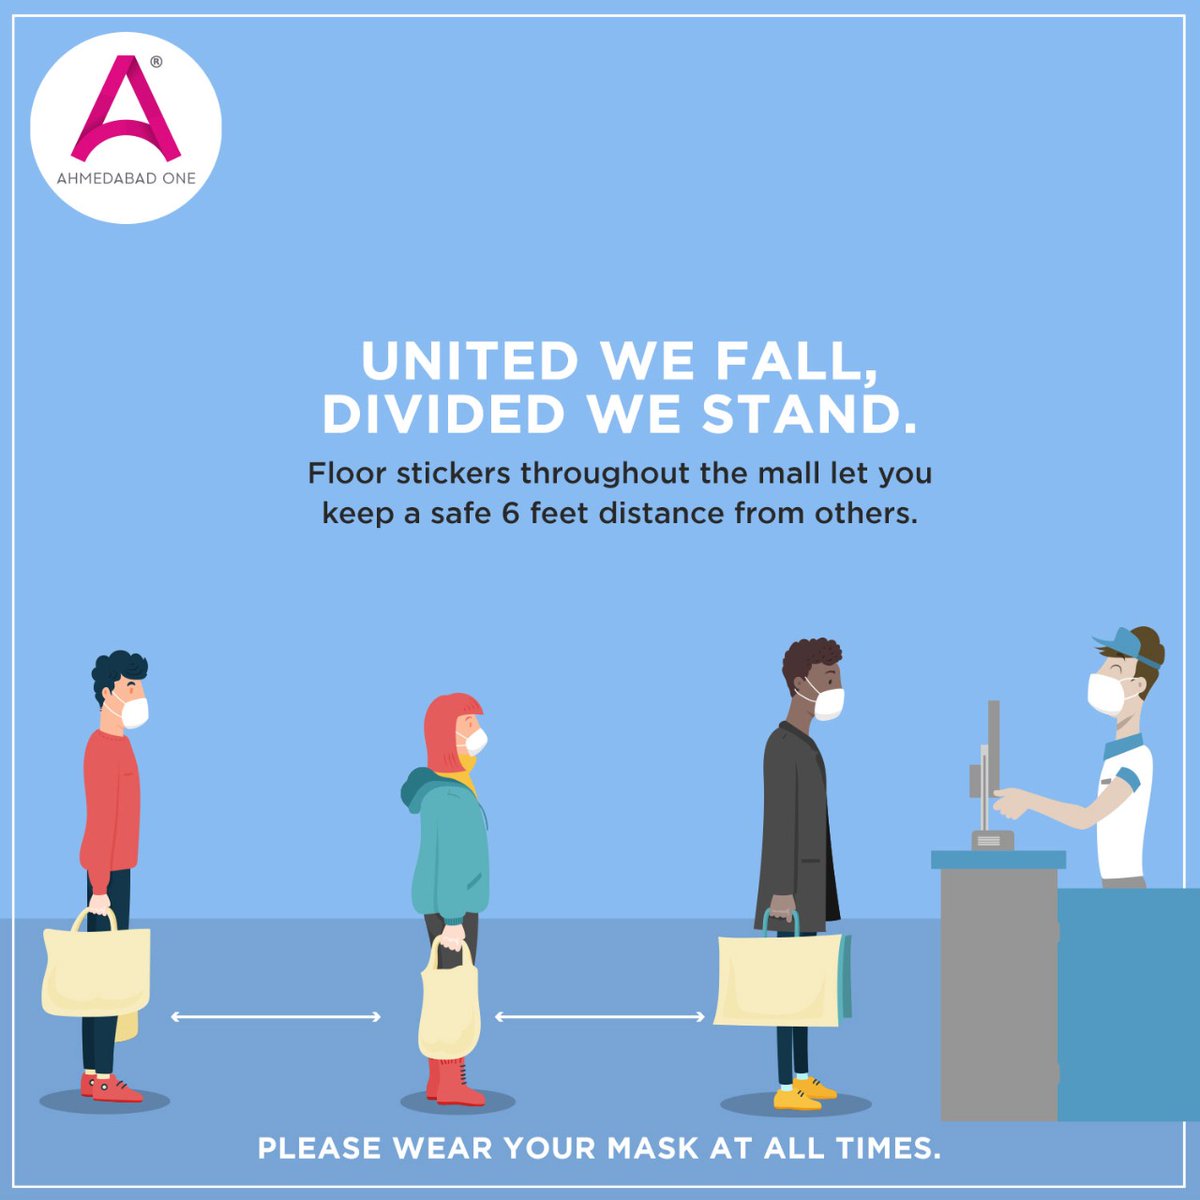 During these New Normal, we must stand by each other. Therefore, we everyday practice social distancing at #Ahmedabadone, following all the stringent safety measures. Step in to have an easy experience at the mall. #IndianMalls #NexusMalls #NowSafe #Ahmedabad #MallsInAmdavad